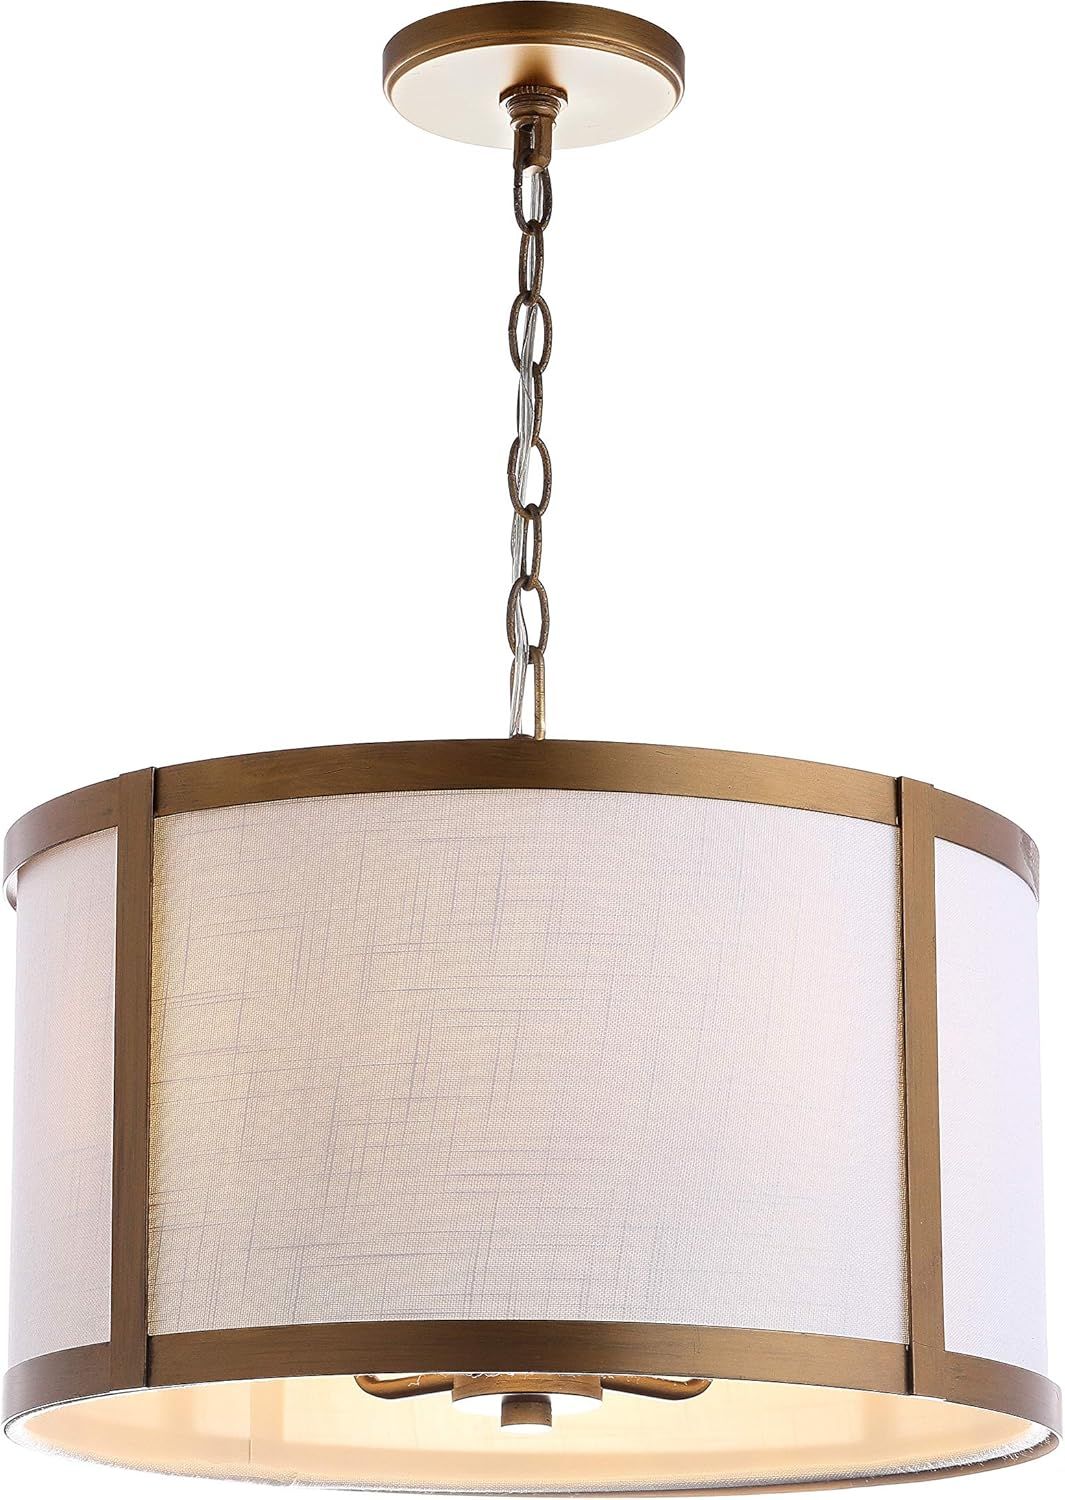 Thatcher Transitional LED Drum Pendant Light - Gold and White